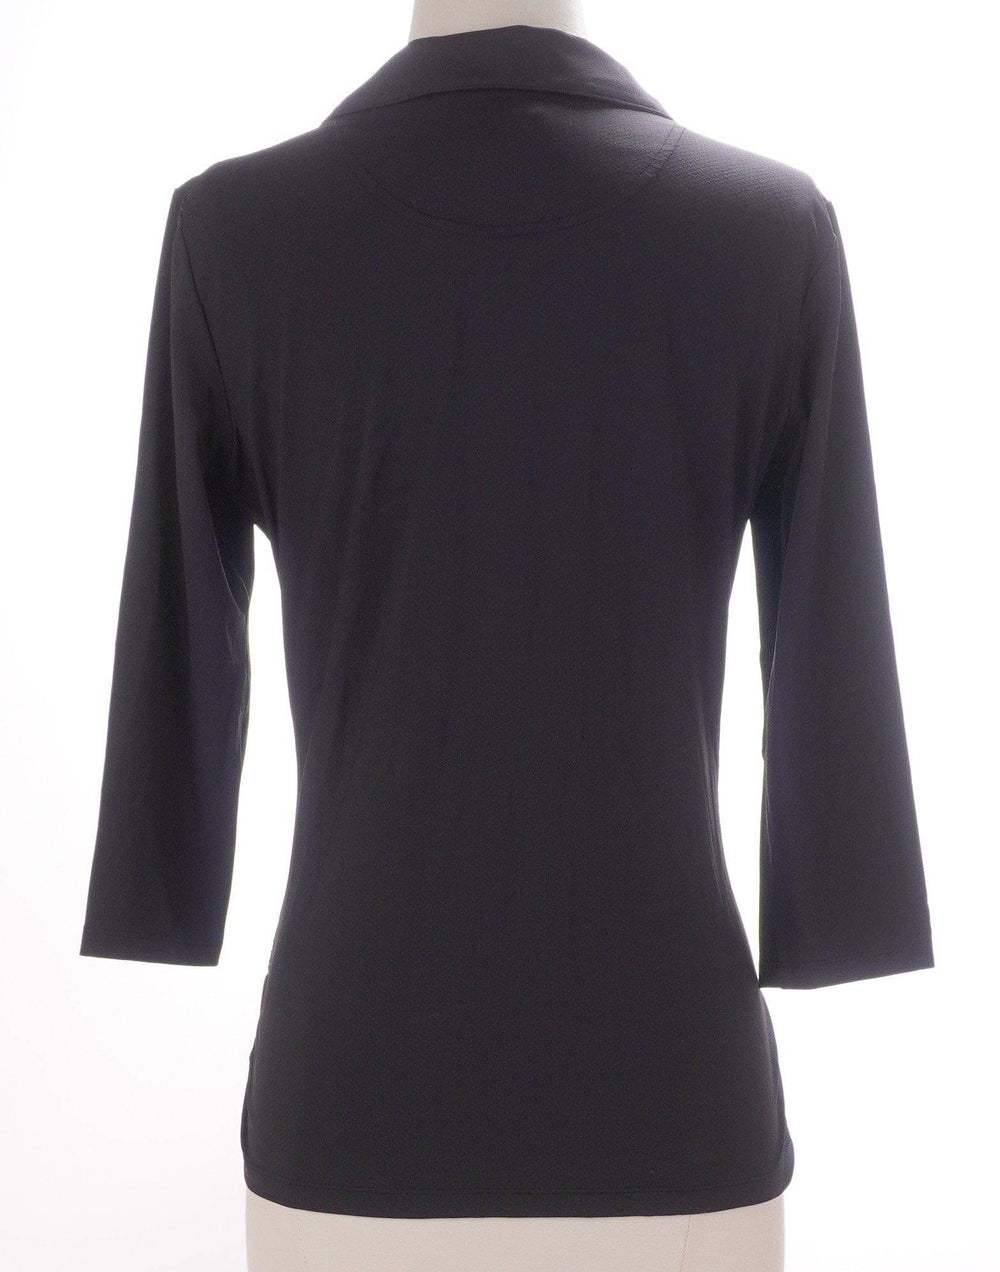 Sport Haley Black / Small / Consigned Sport Haley Long Sleeve Top - Black - Size Small